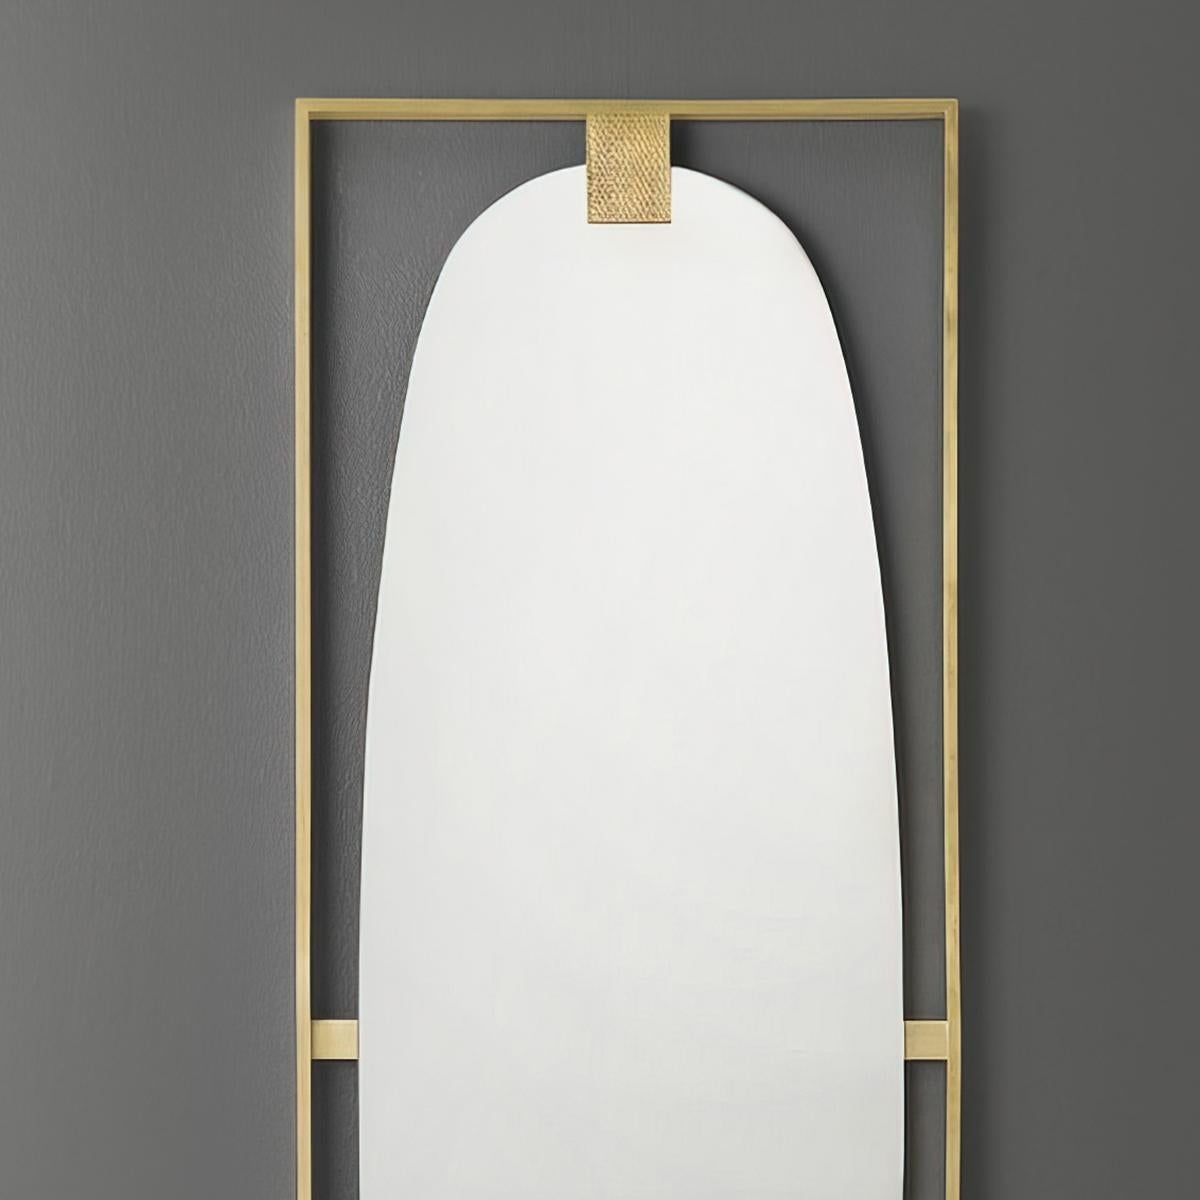 Art Deco Brass Wall Mirror, a tall rectangular form wall mirror with a polished satin brass frame centered with an oval mirror plate.

Dimensions: 19.5